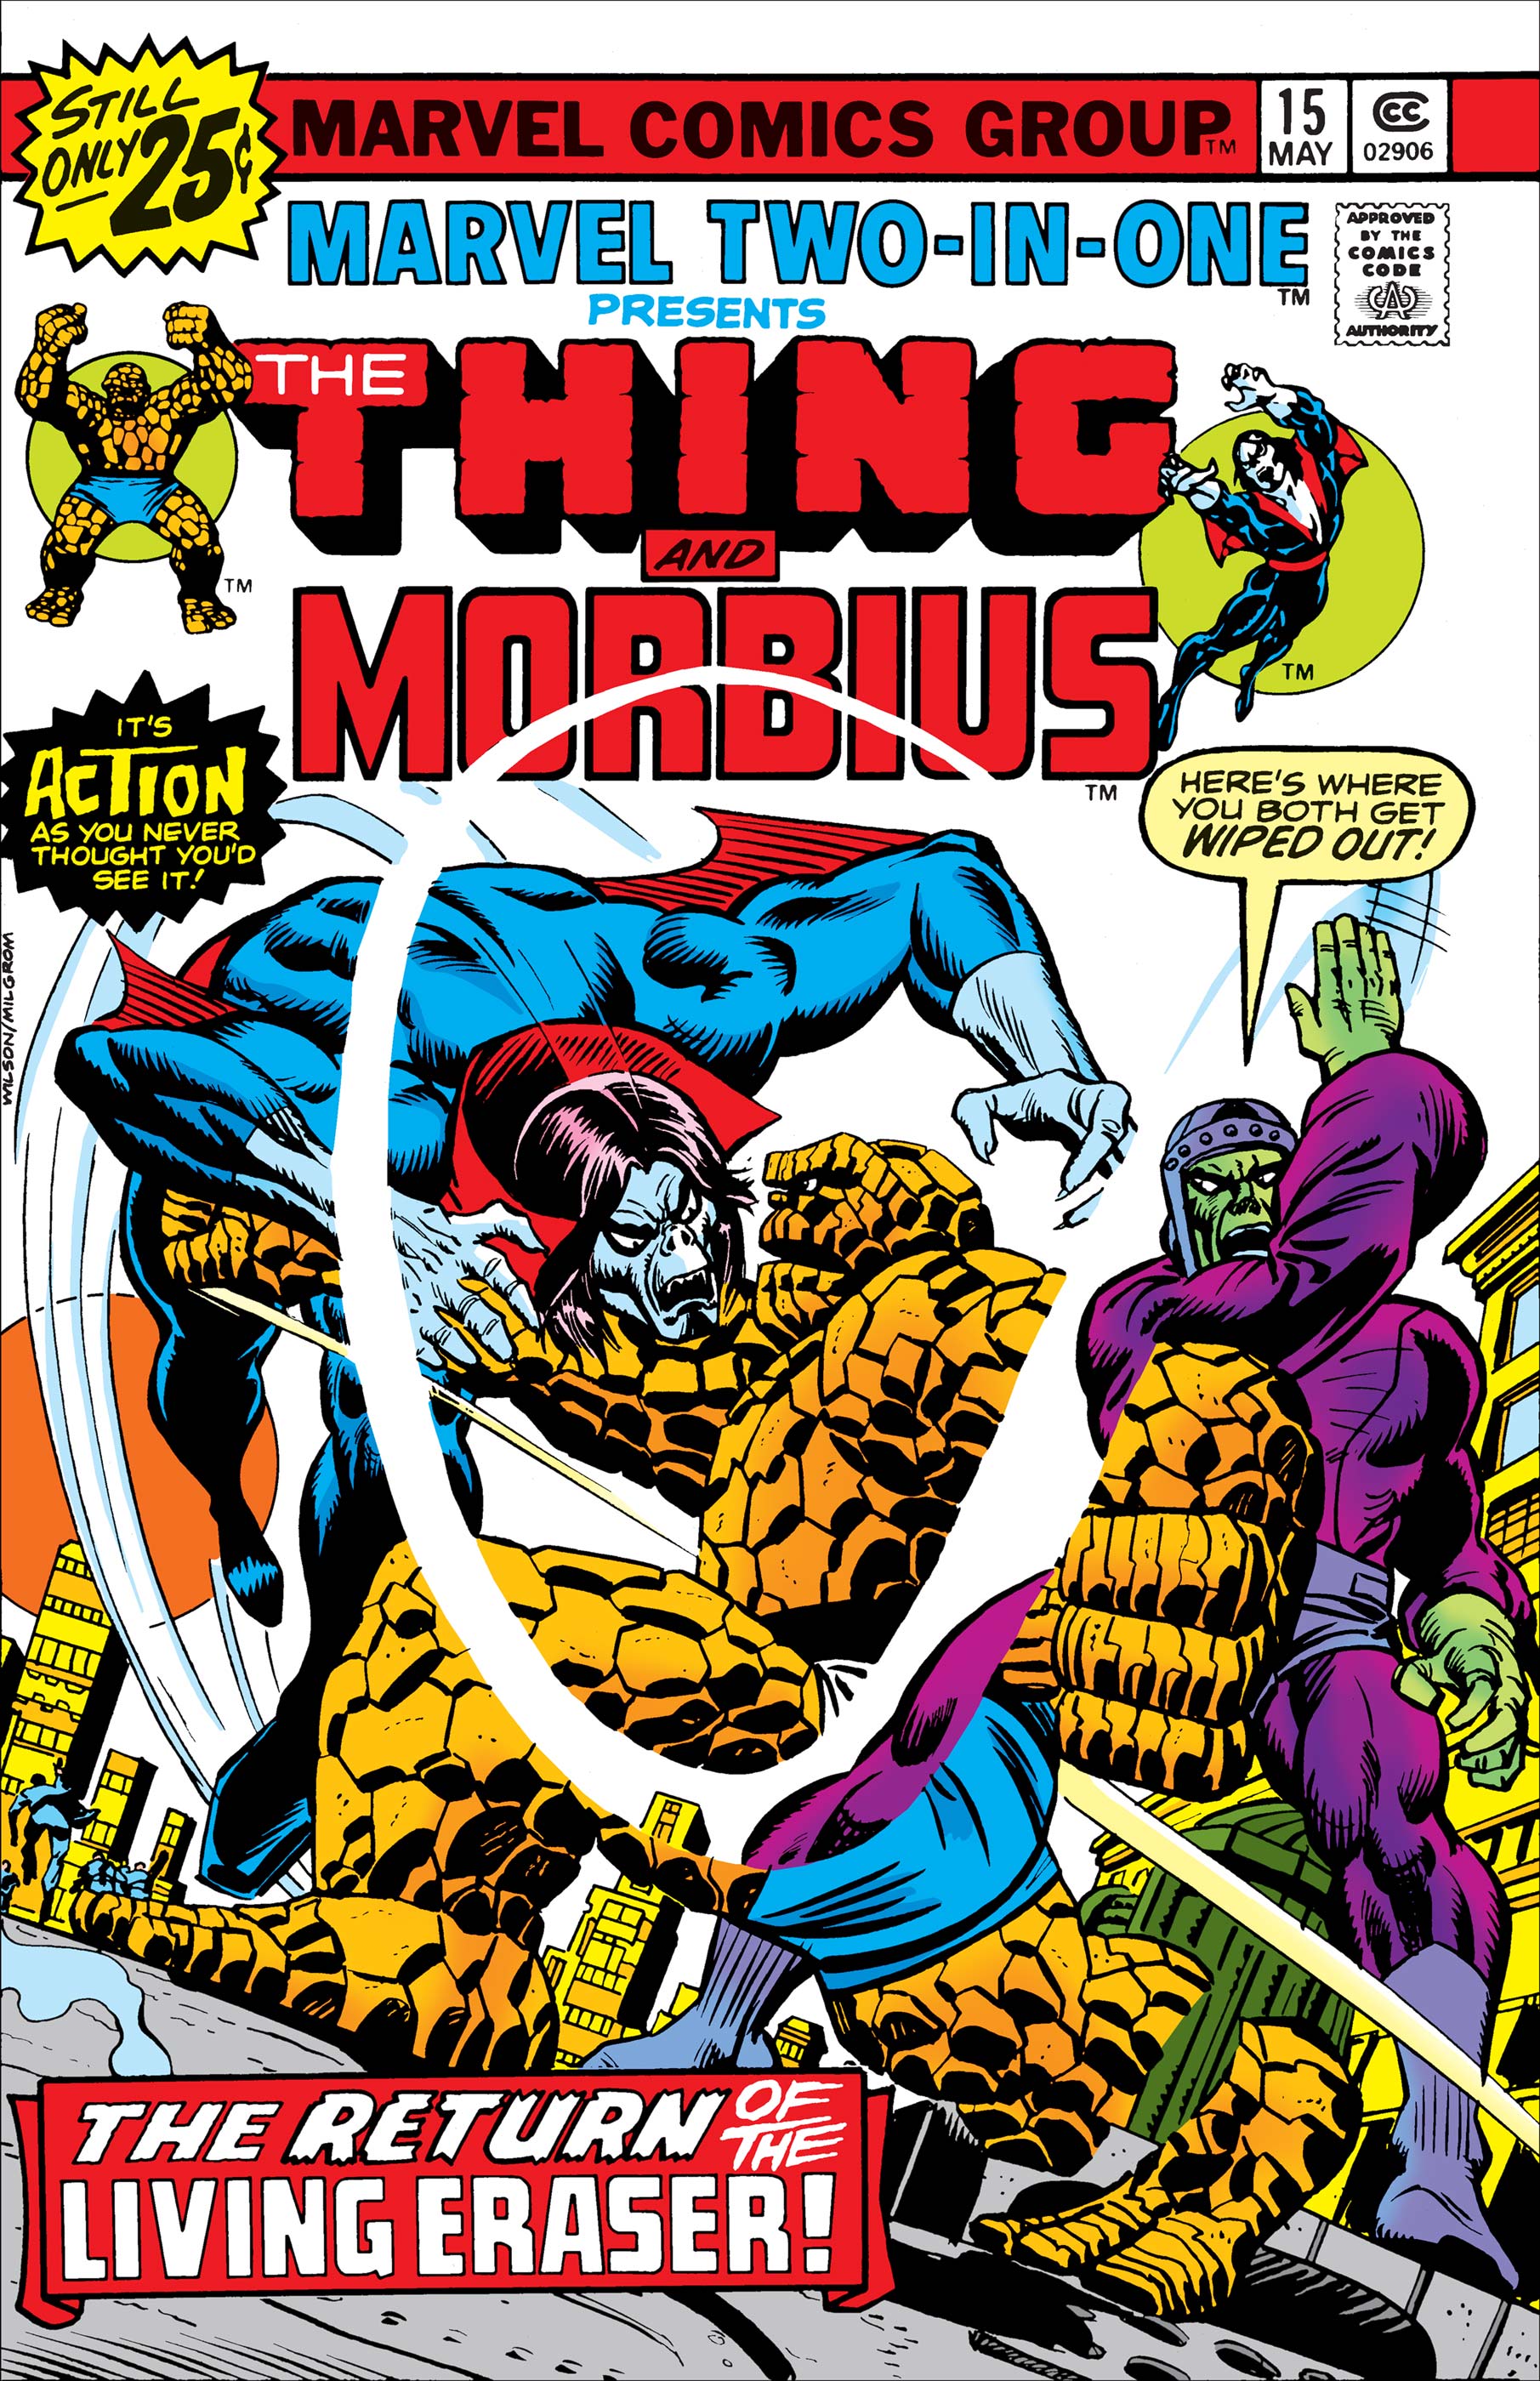 Marvel Two-in-One (1974) #15